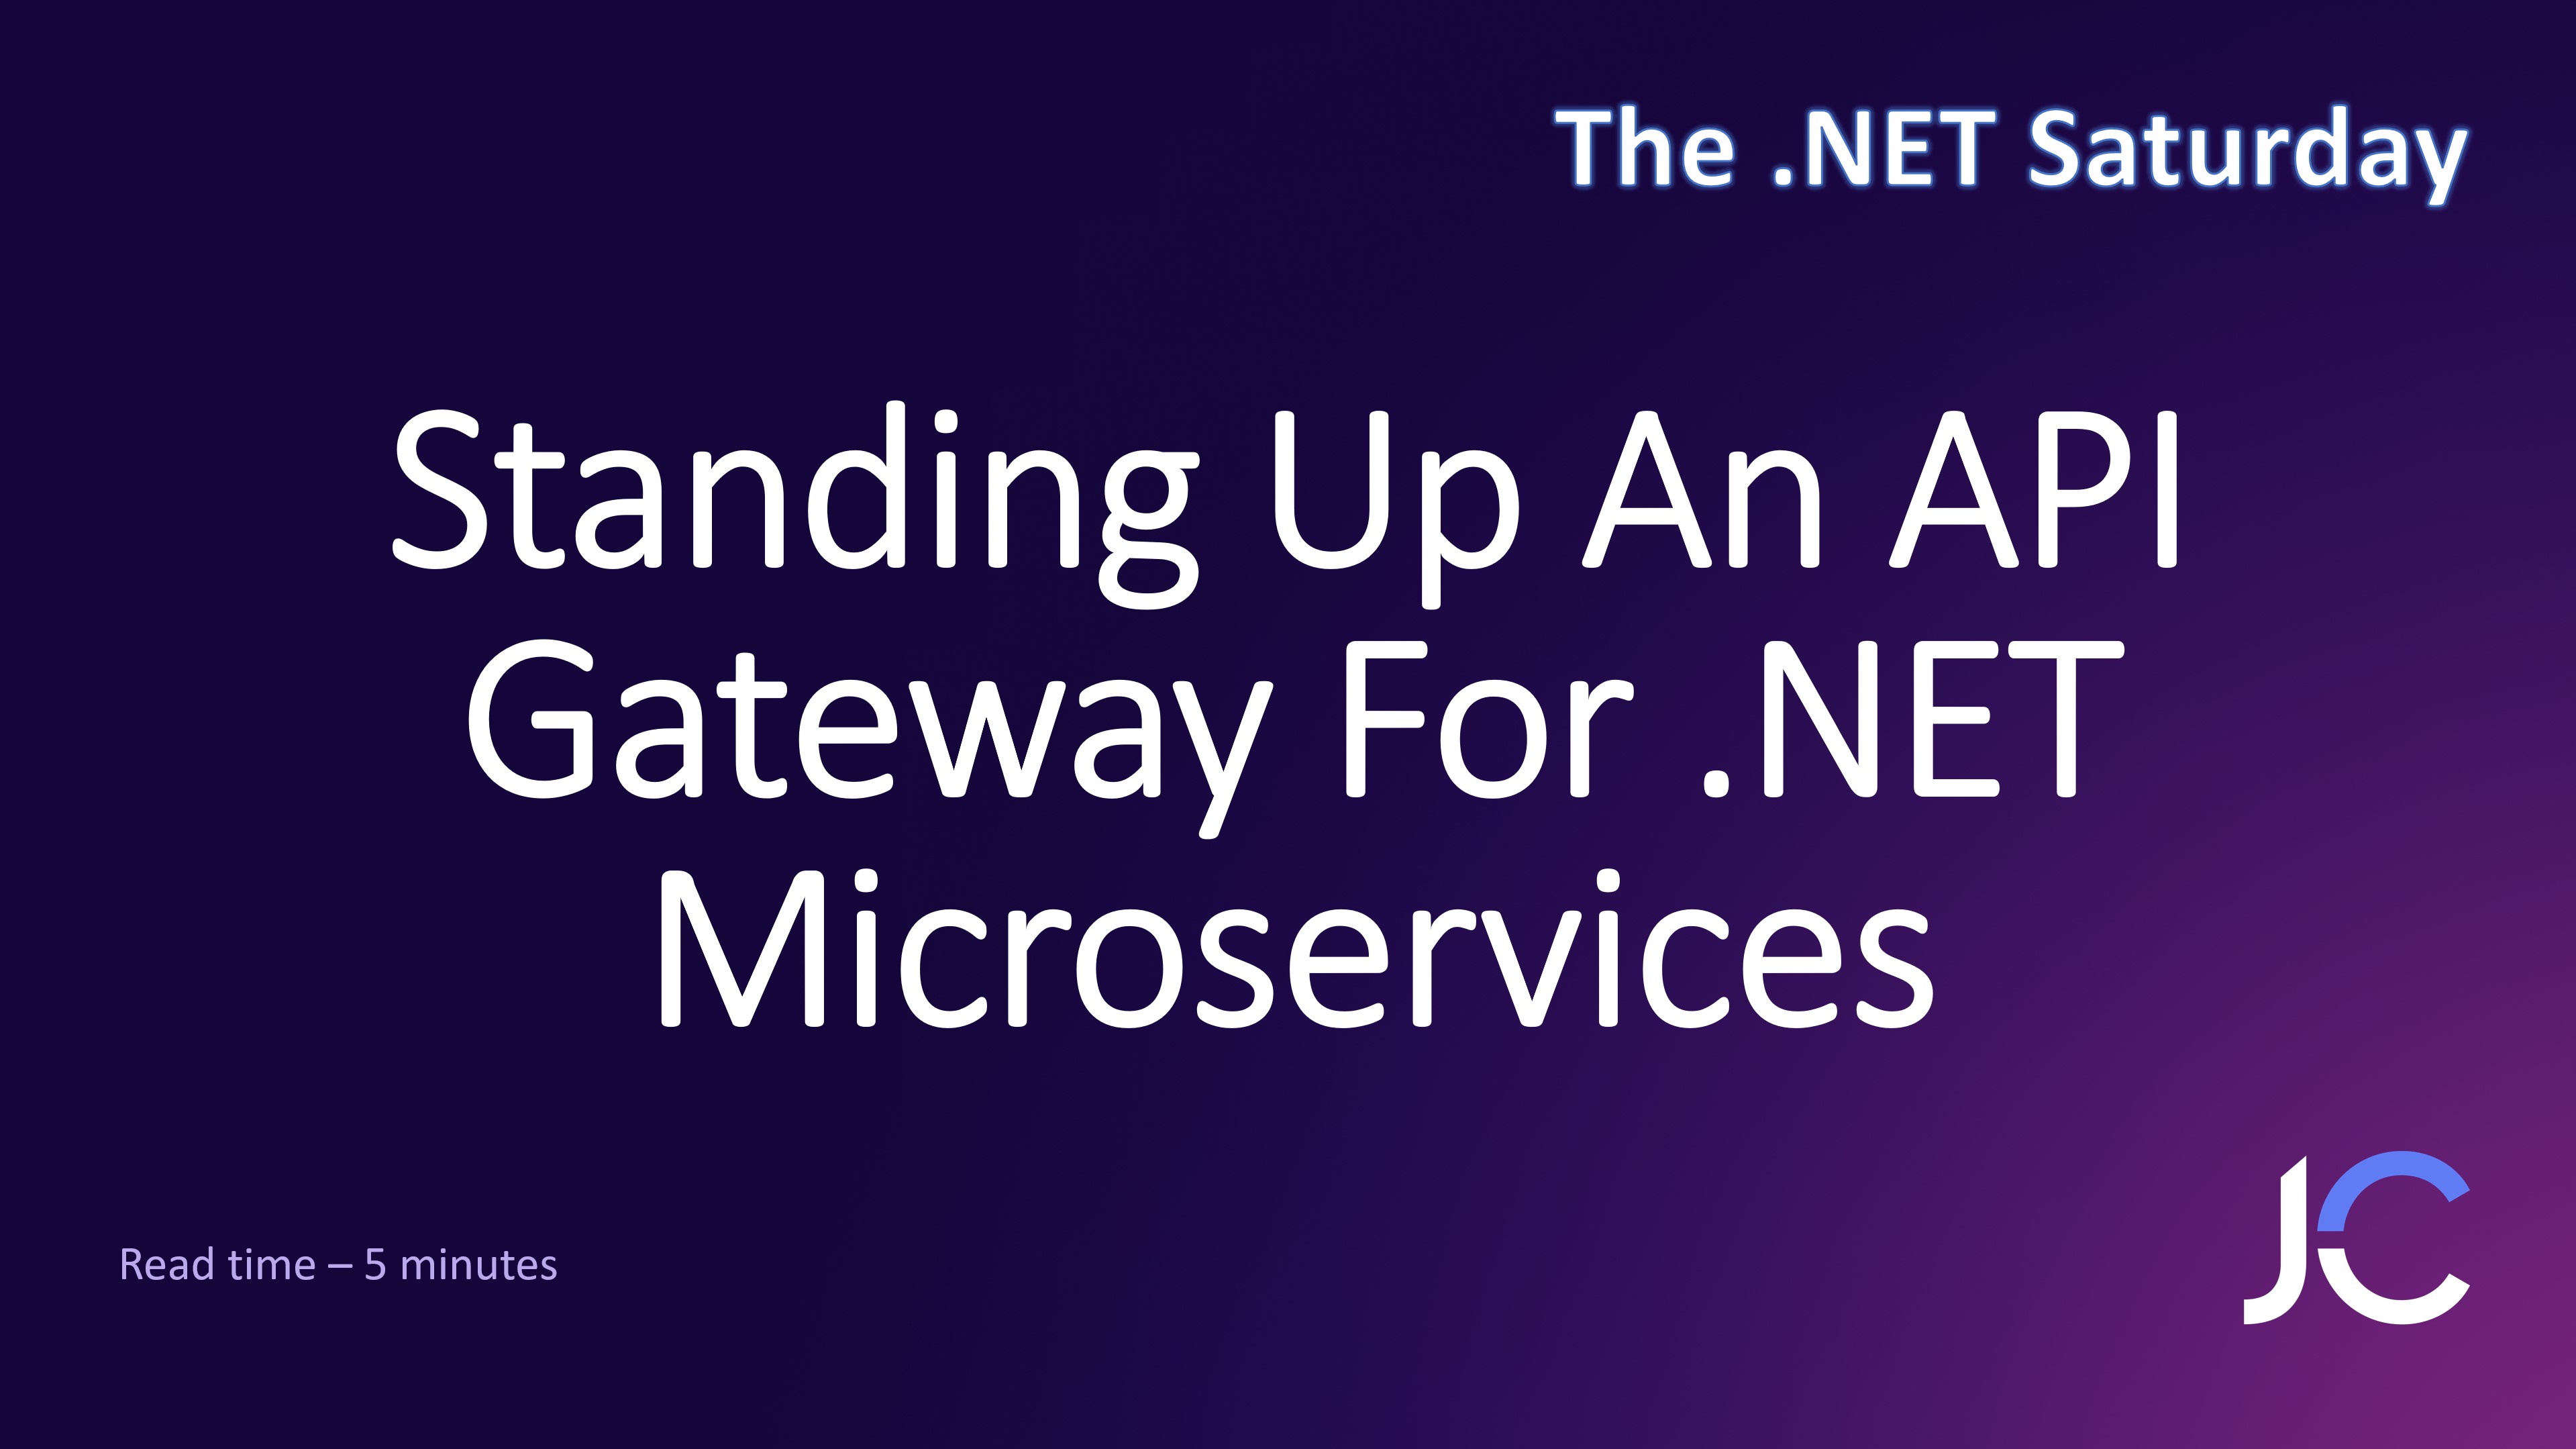 Standing Up An API Gateway For .NET Microservices